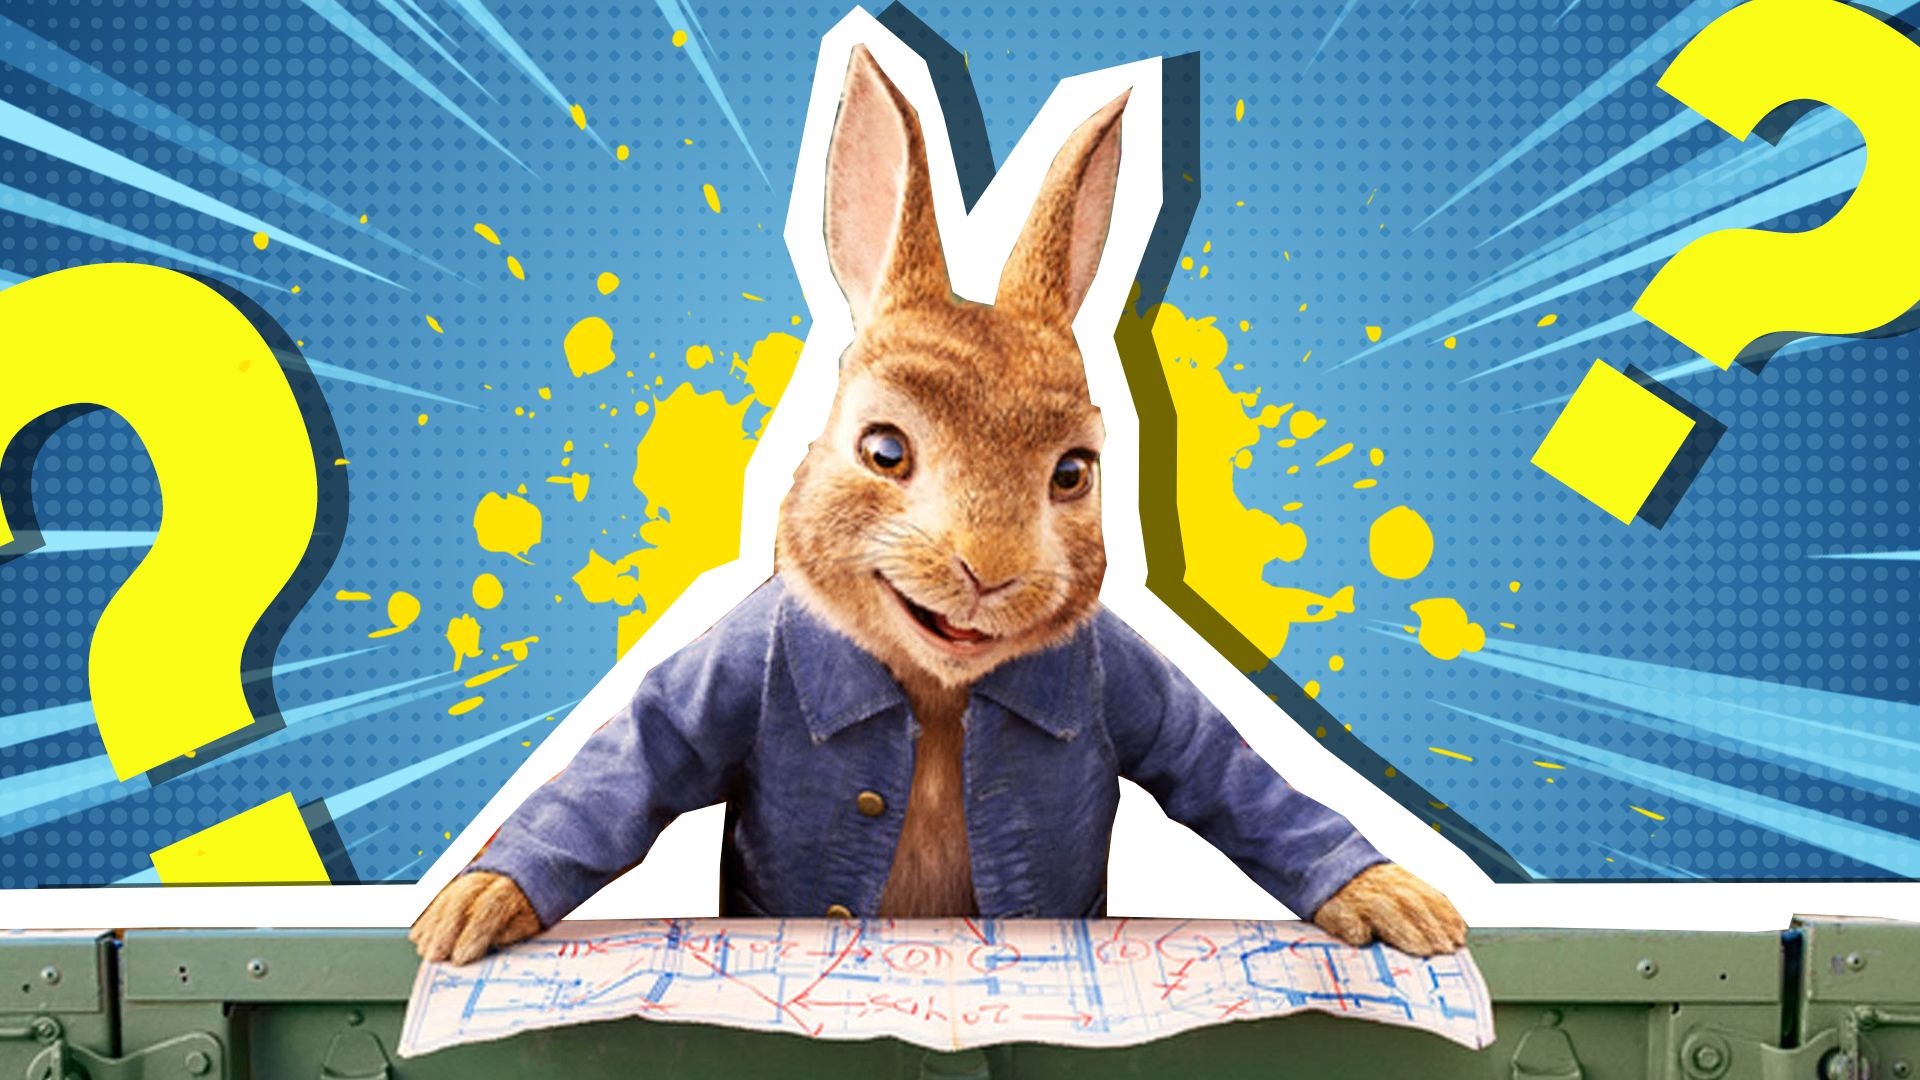 Peter Rabbit looking at a map